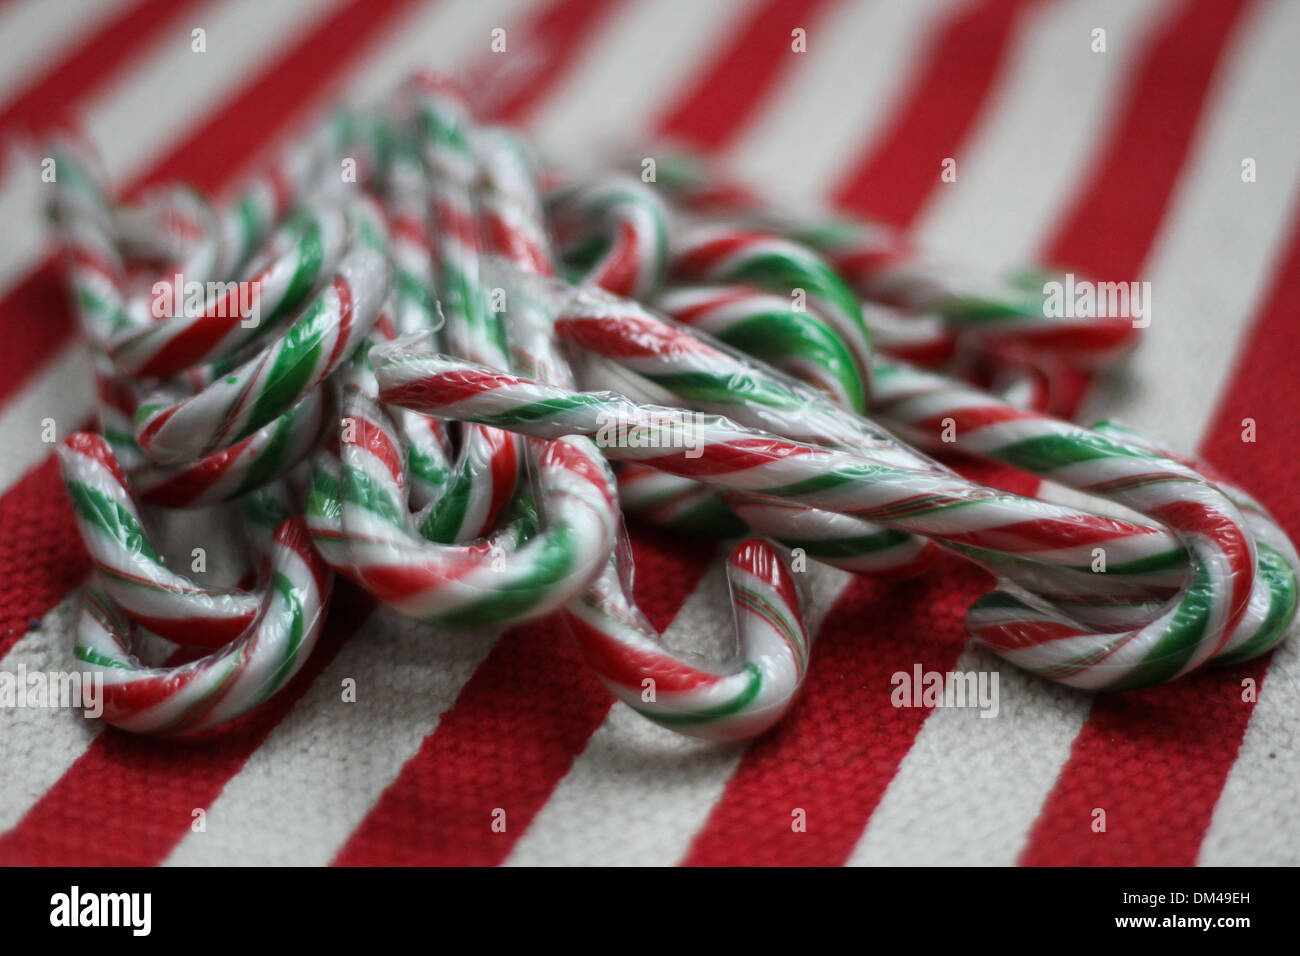 Candy Canes are a traditional sweet treat during the Christmas season. Stock Photo